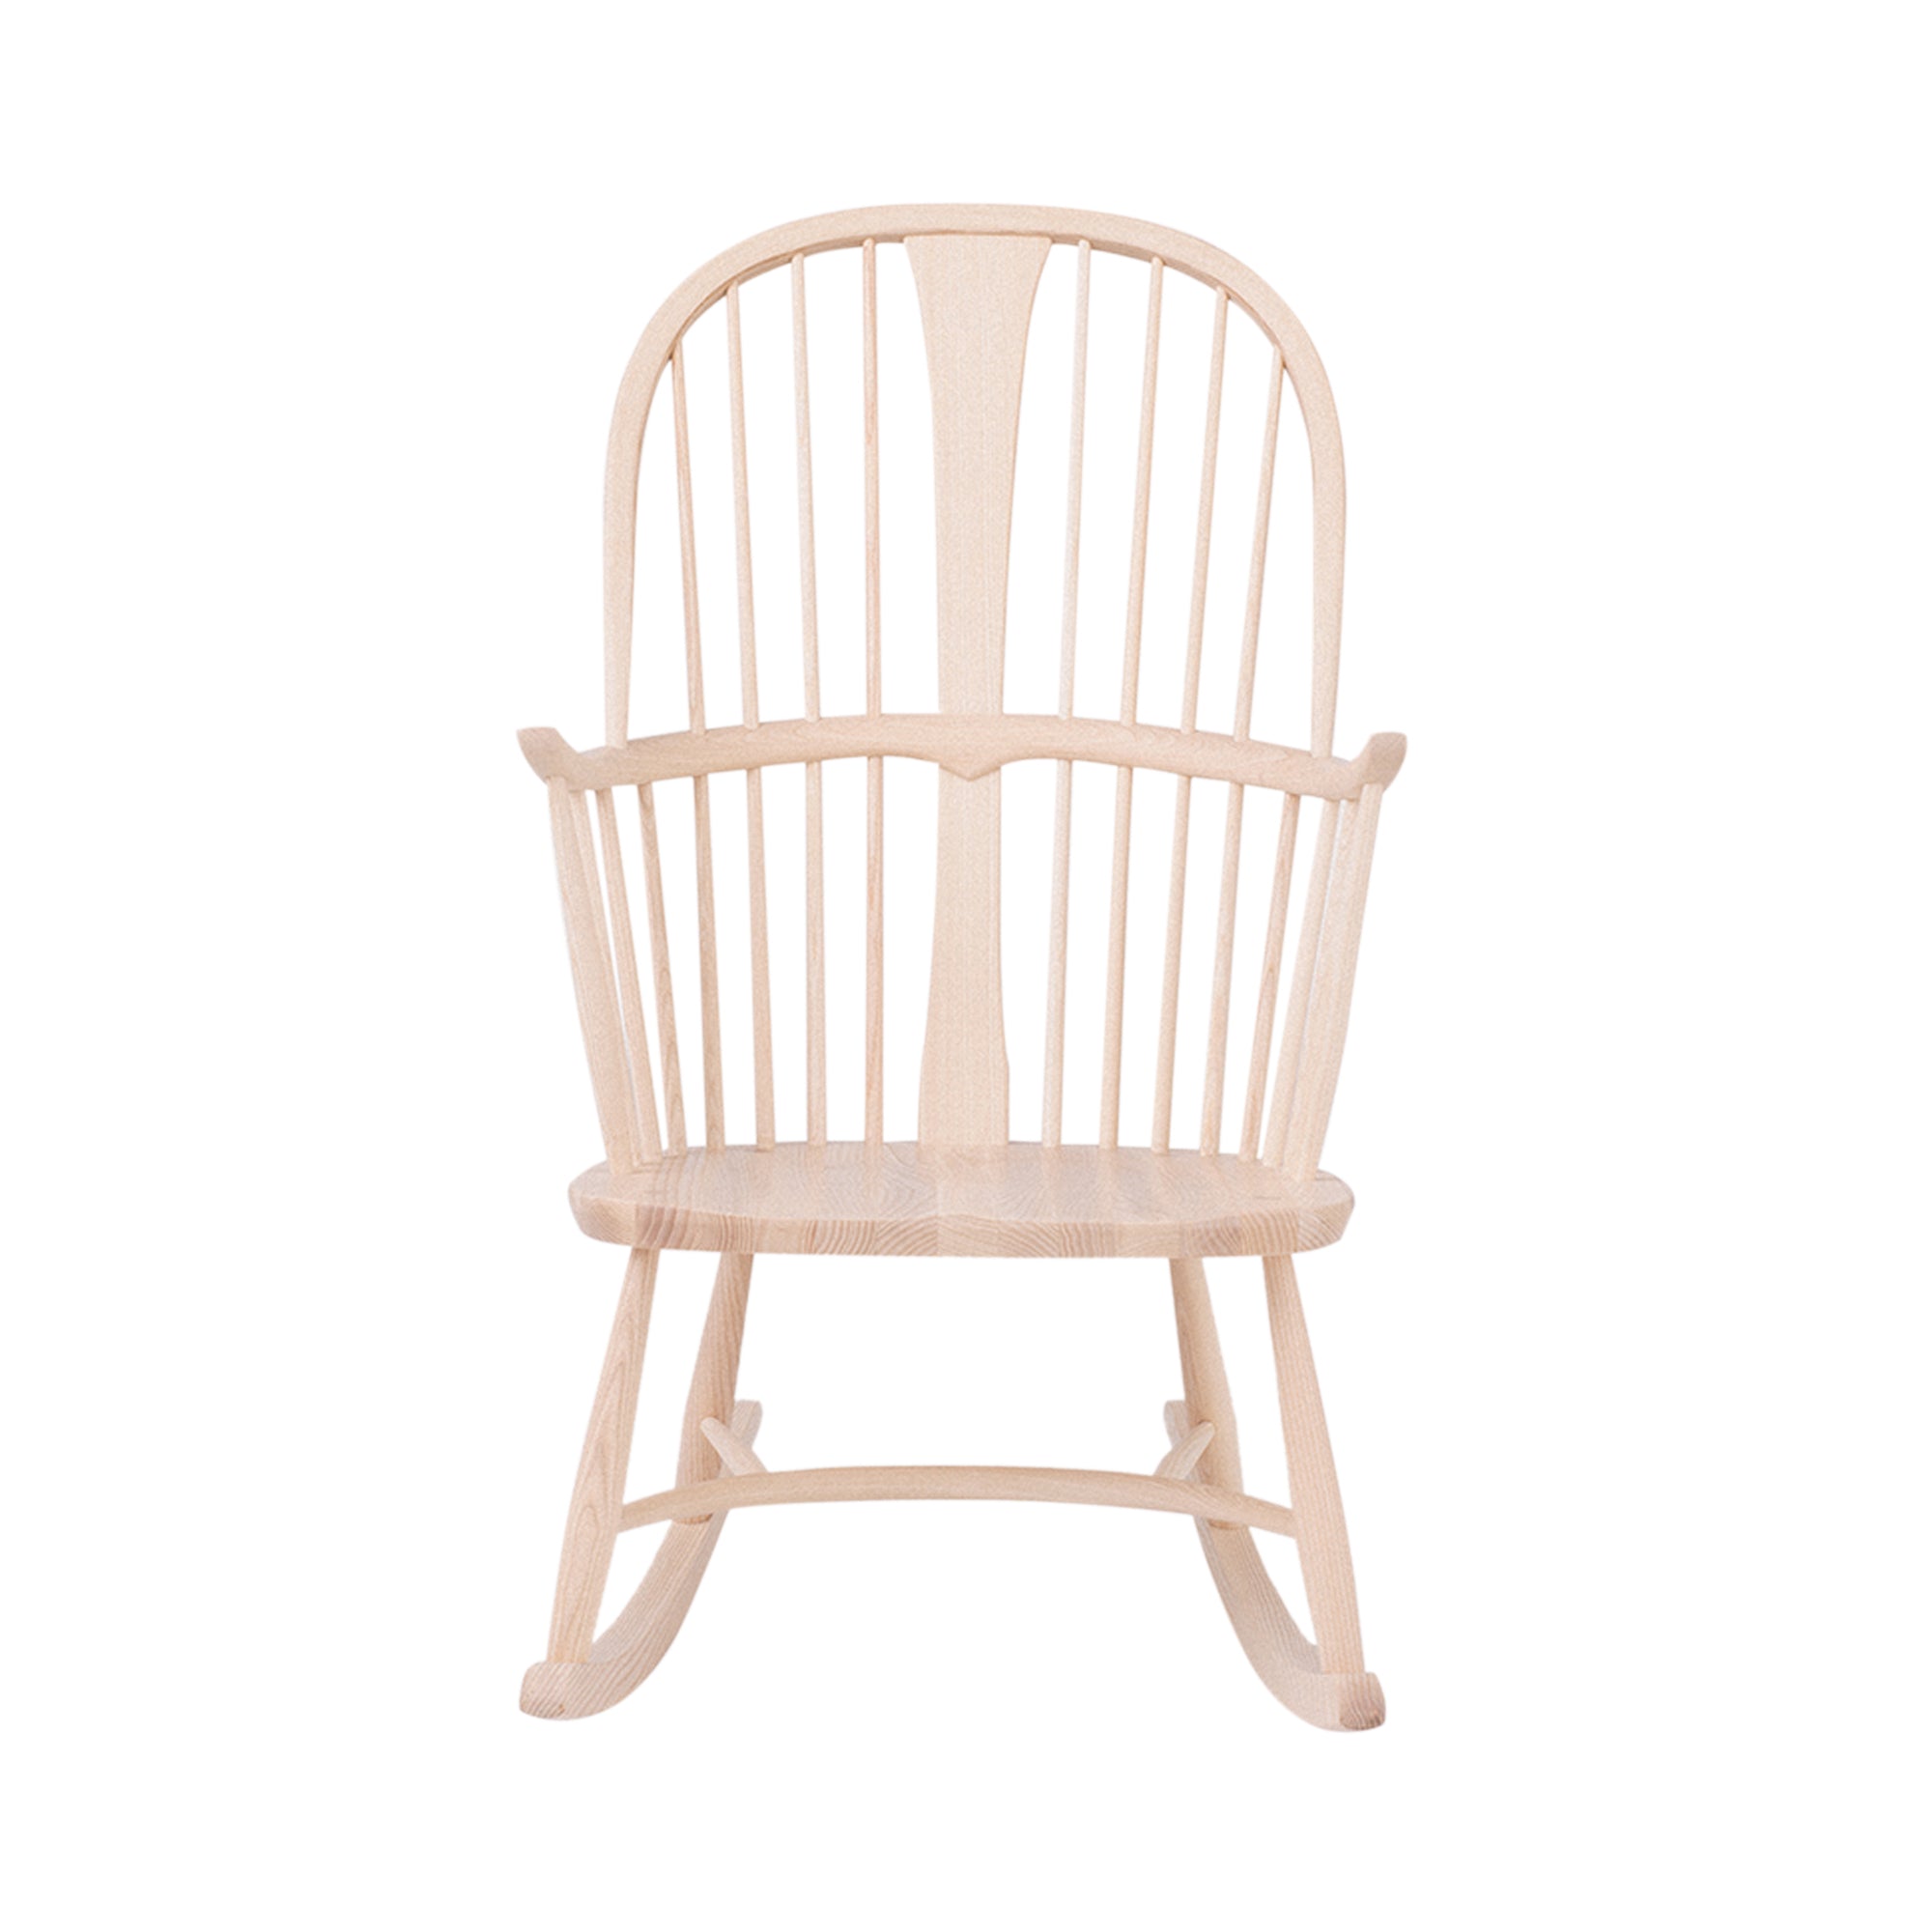 Originals Chairmakers Rocking Chair: Natural Ash